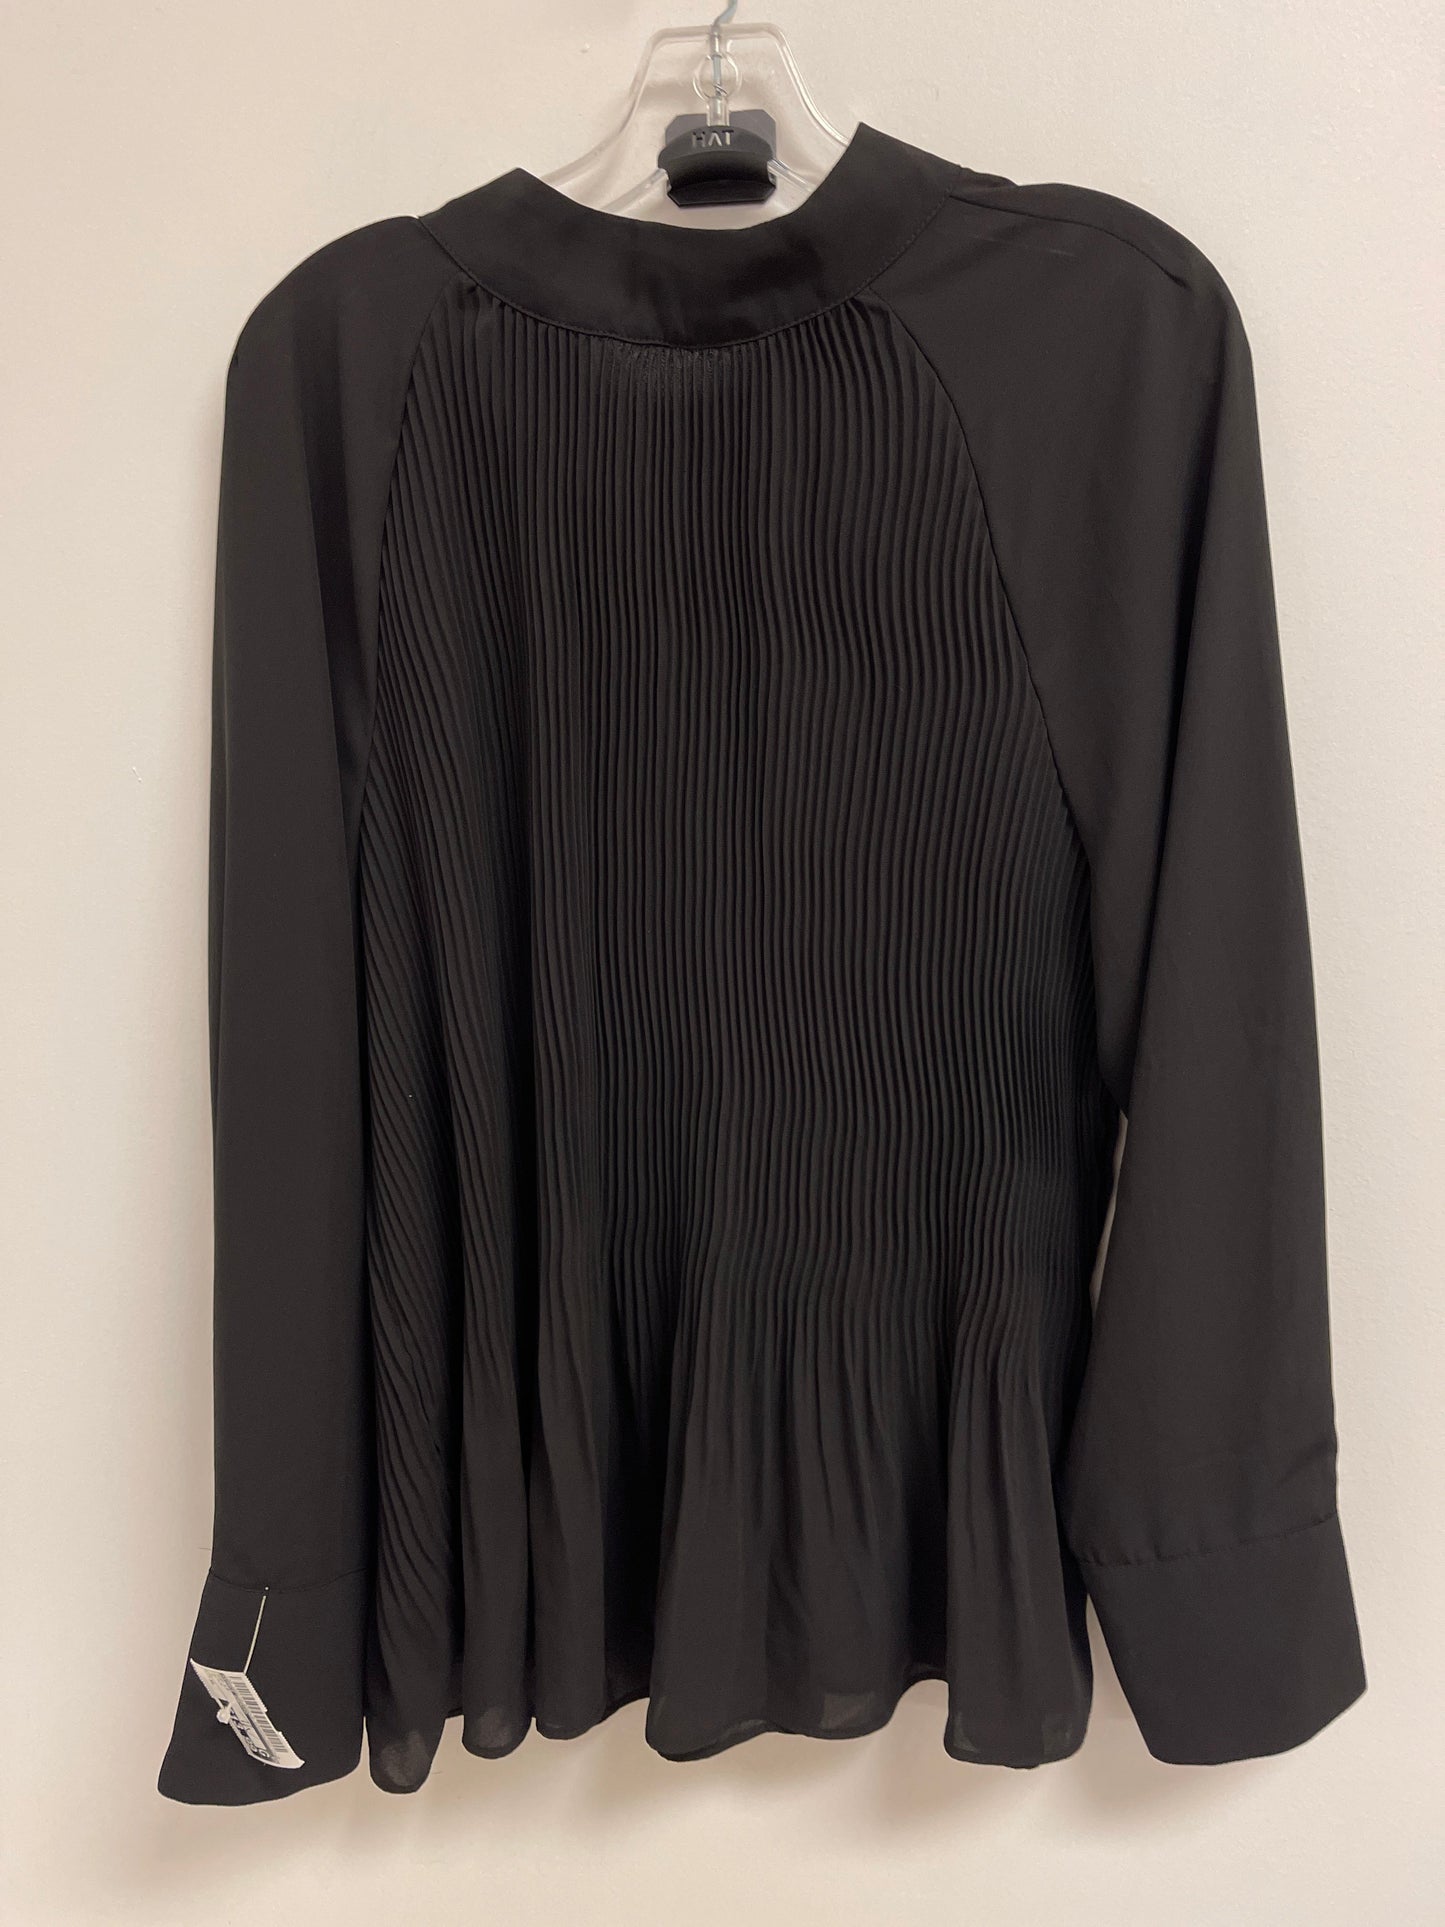 Black Top Long Sleeve Vince Camuto, Size Xl